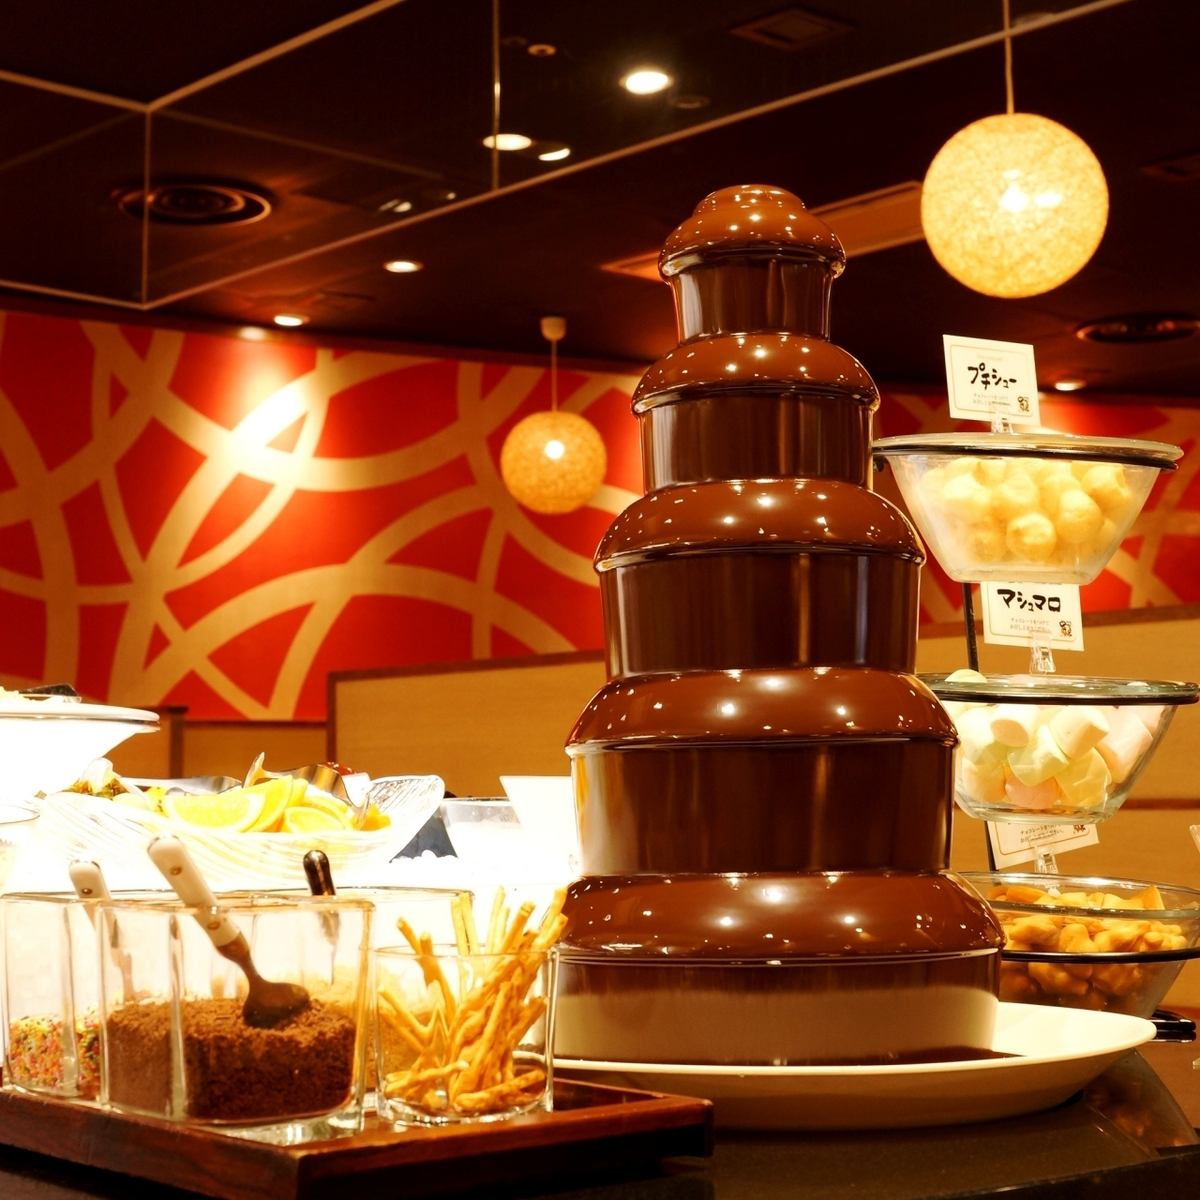 Chocolate fountain popular with women and children !! All-you-can-eat dessert